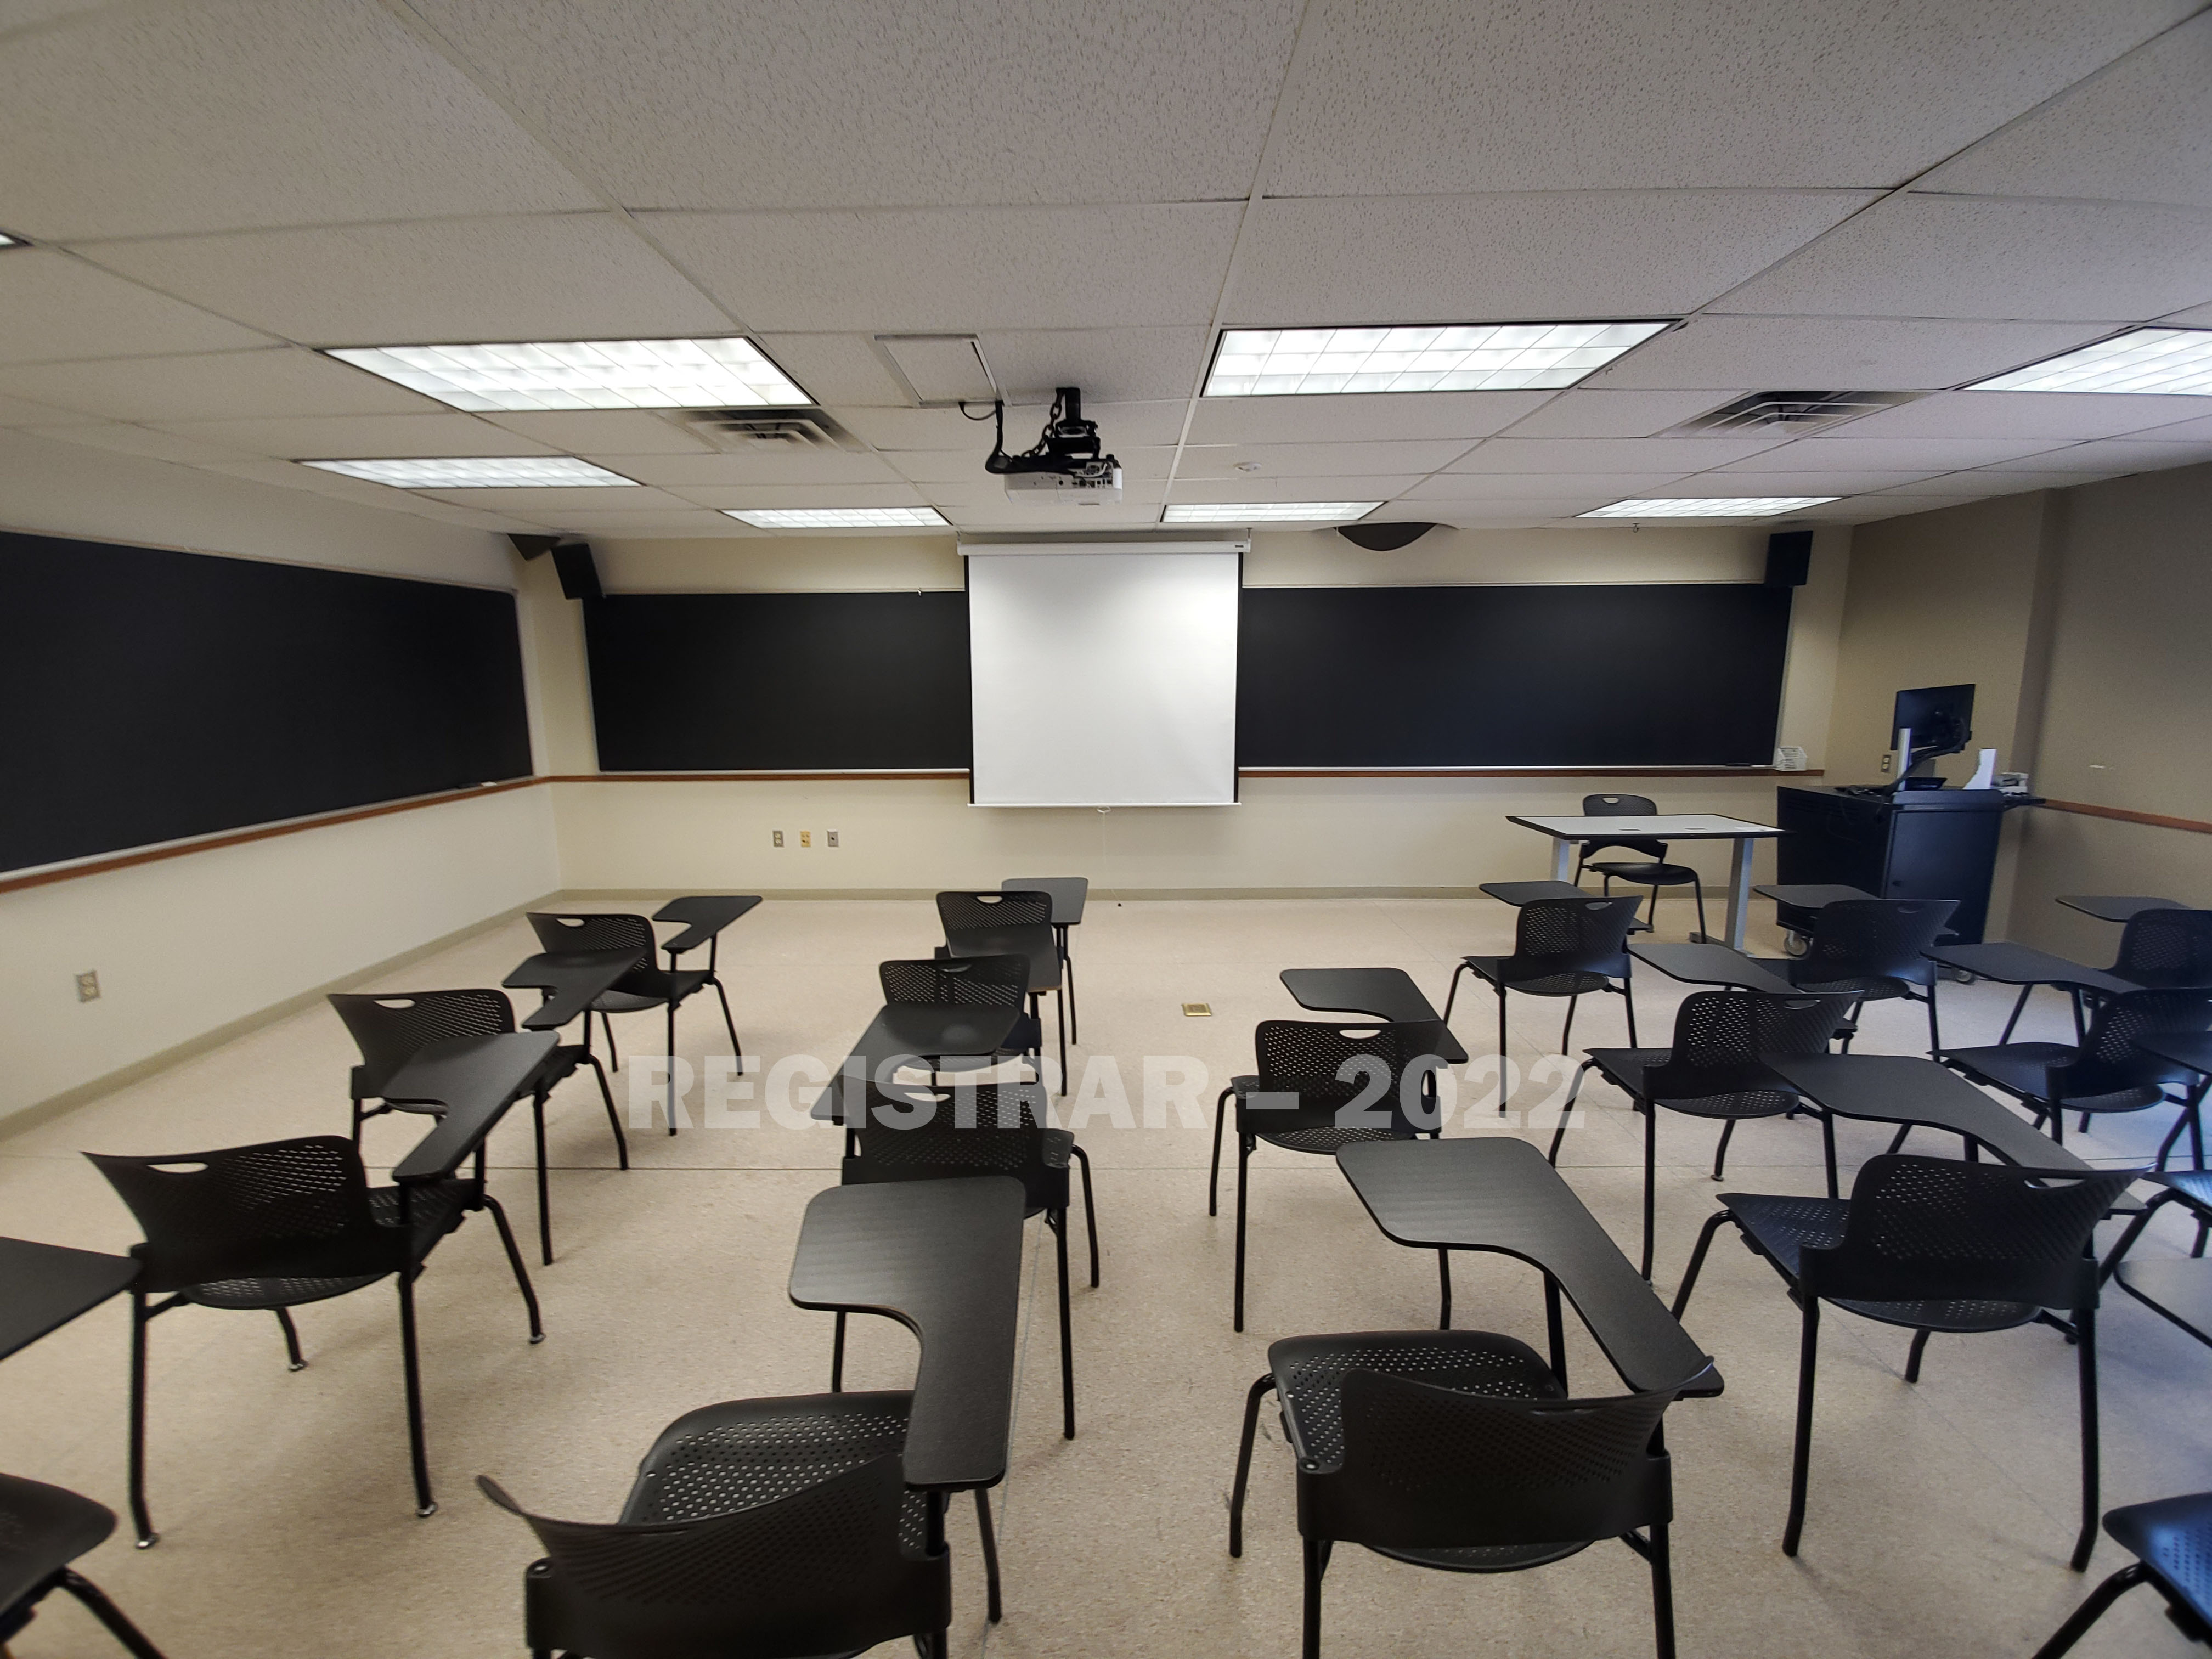 Enarson Classroom Building room 326 ultra wide angle view from the back of the room with projector screen down